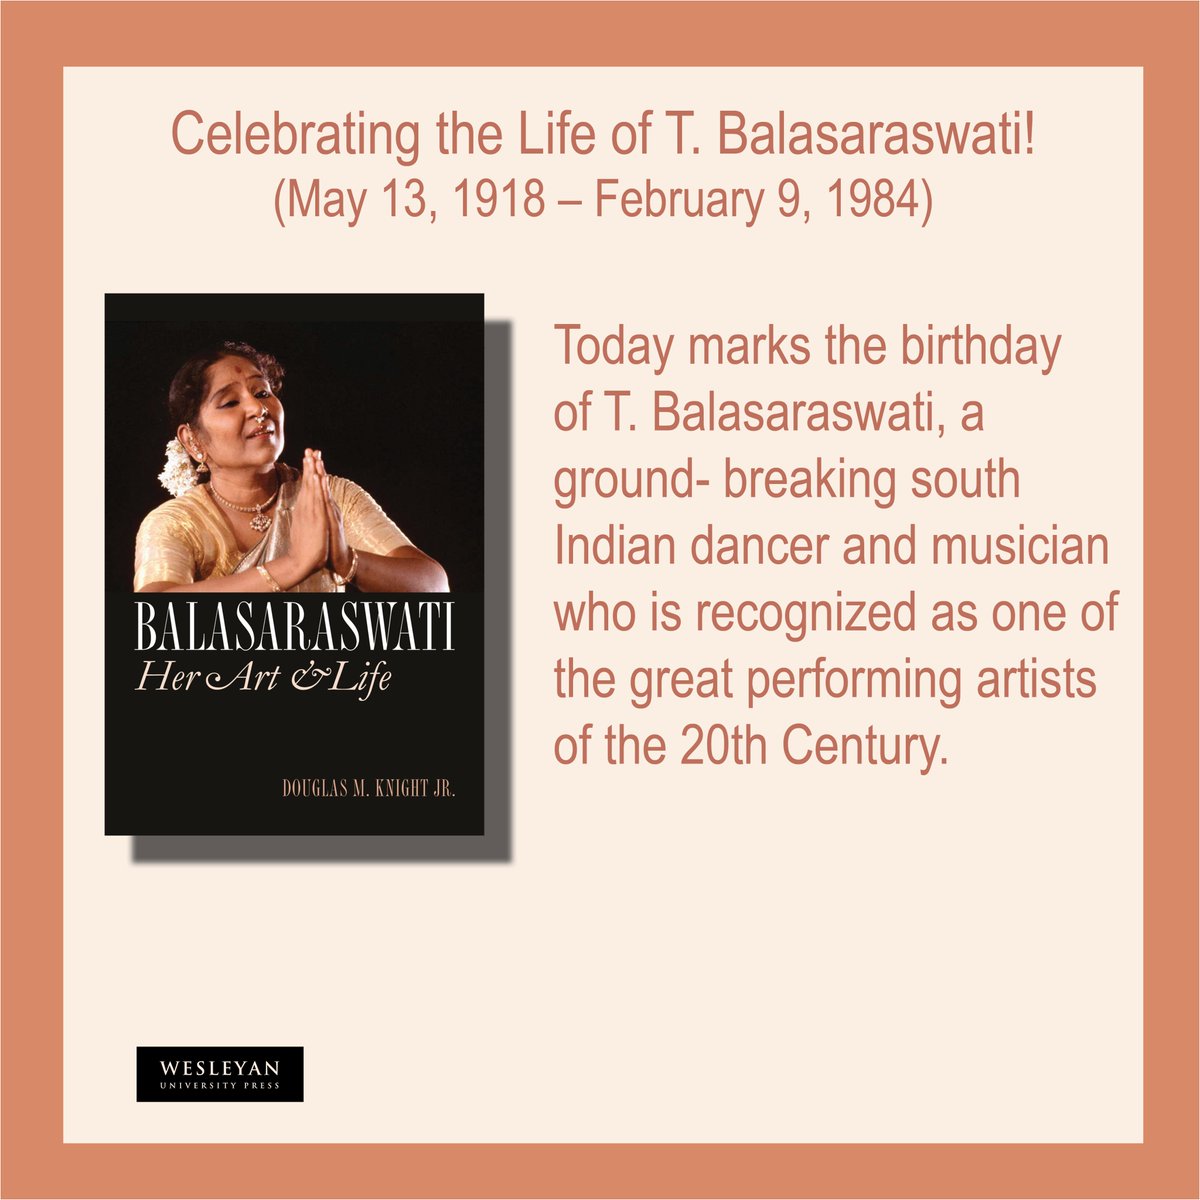 test Twitter Media - Today marks the birthday of T. Balasaraswati, ground-breaking dancer and musician recognized as one of the great performing artists of the 20th Century. 
#WomenInArts #SouthIndia #Dance #Biography #bharatanatyam
Read more about her: https://t.co/0JwJ20IIfs https://t.co/NGn0nDQSek